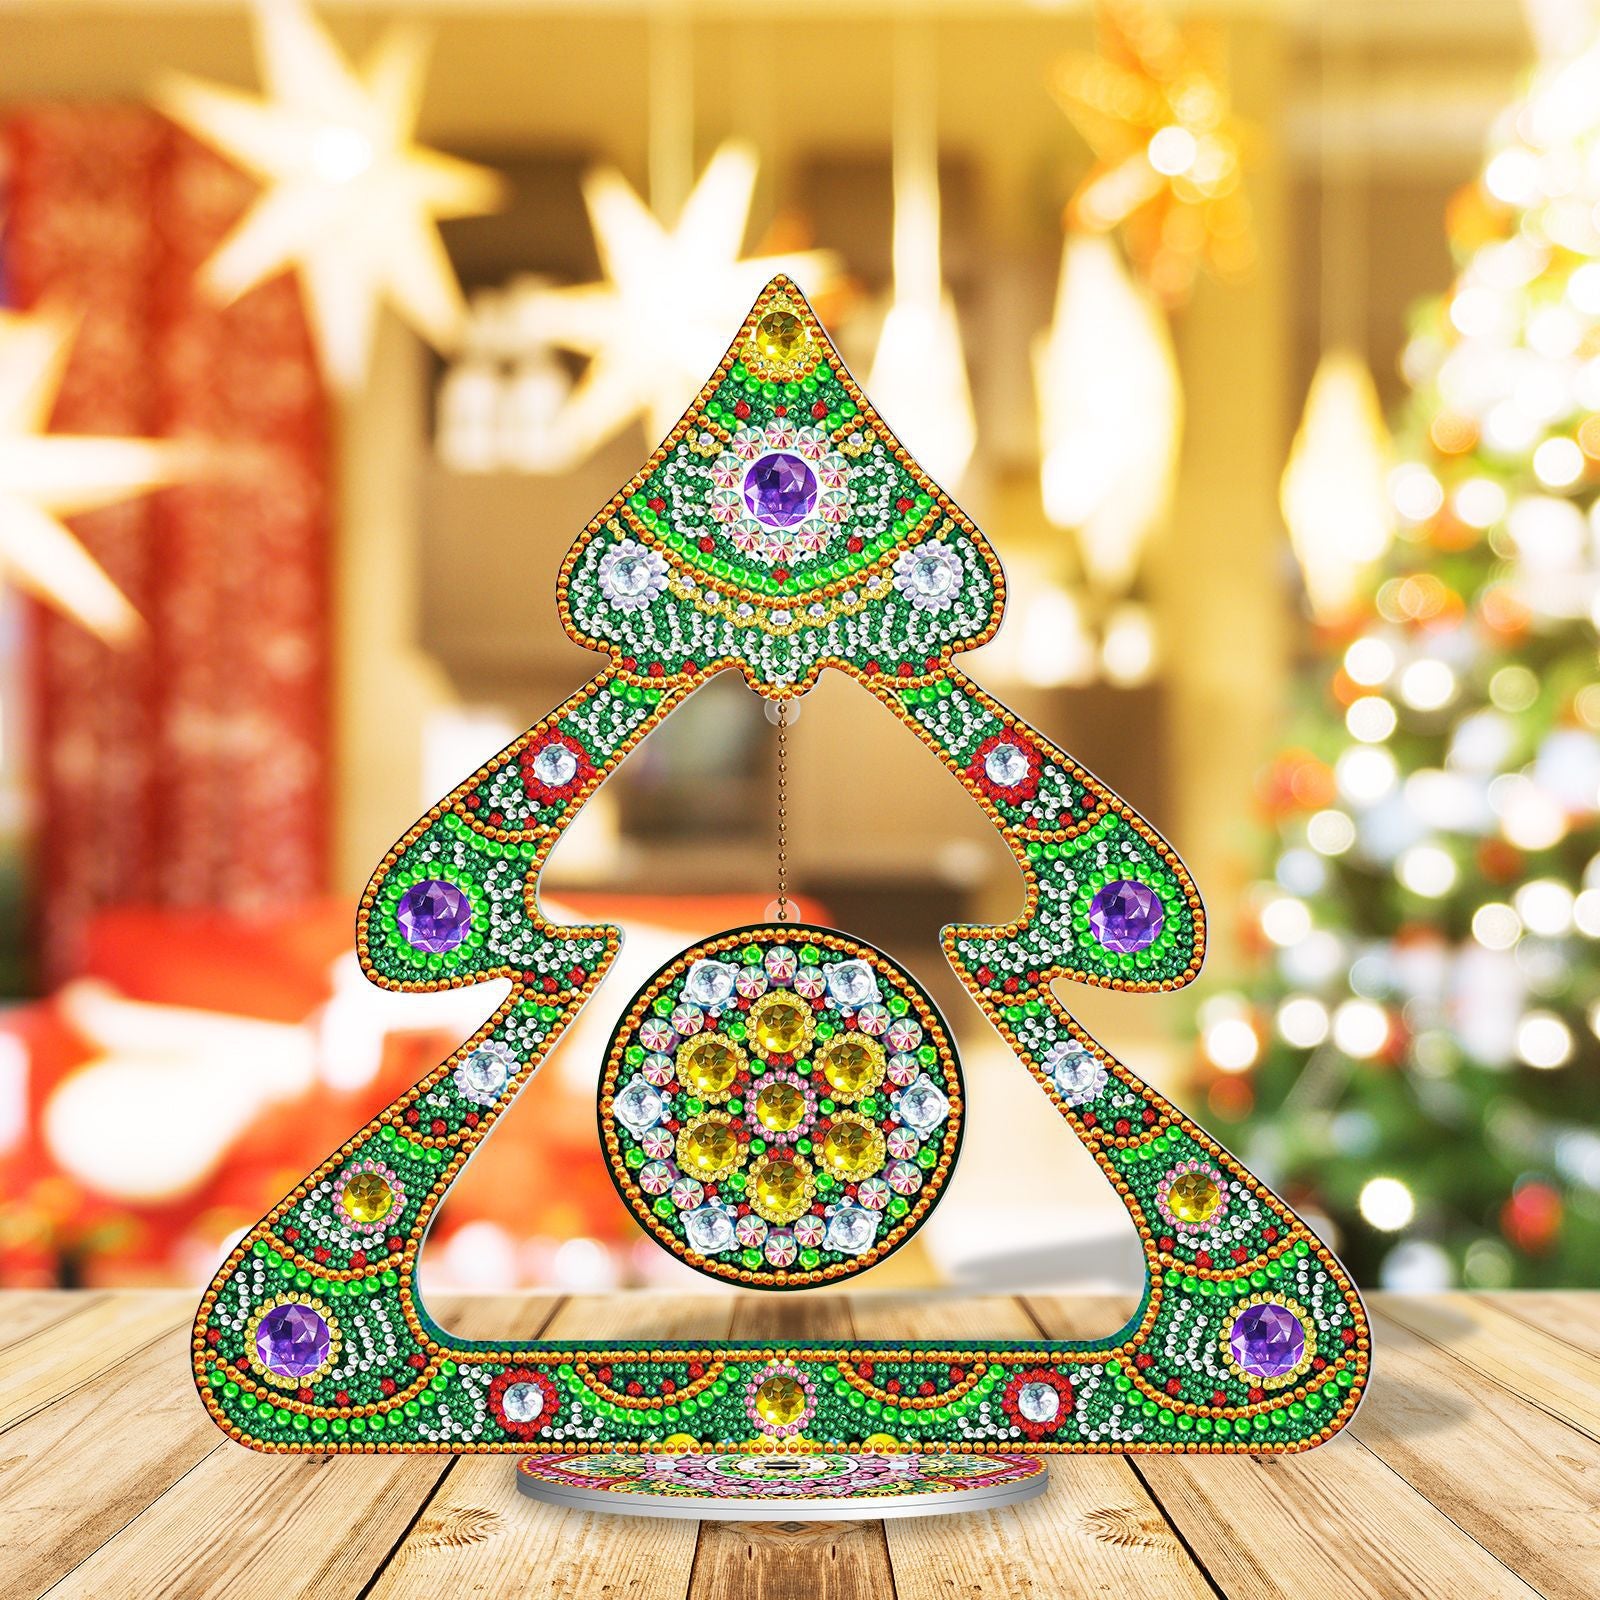 10pcs/set DIY Diamond Art Valentine's Holiday Ornaments Without Tray Wood  Material Diamond Painting Crystal Rhinestone Ornaments With Stand Table Deco